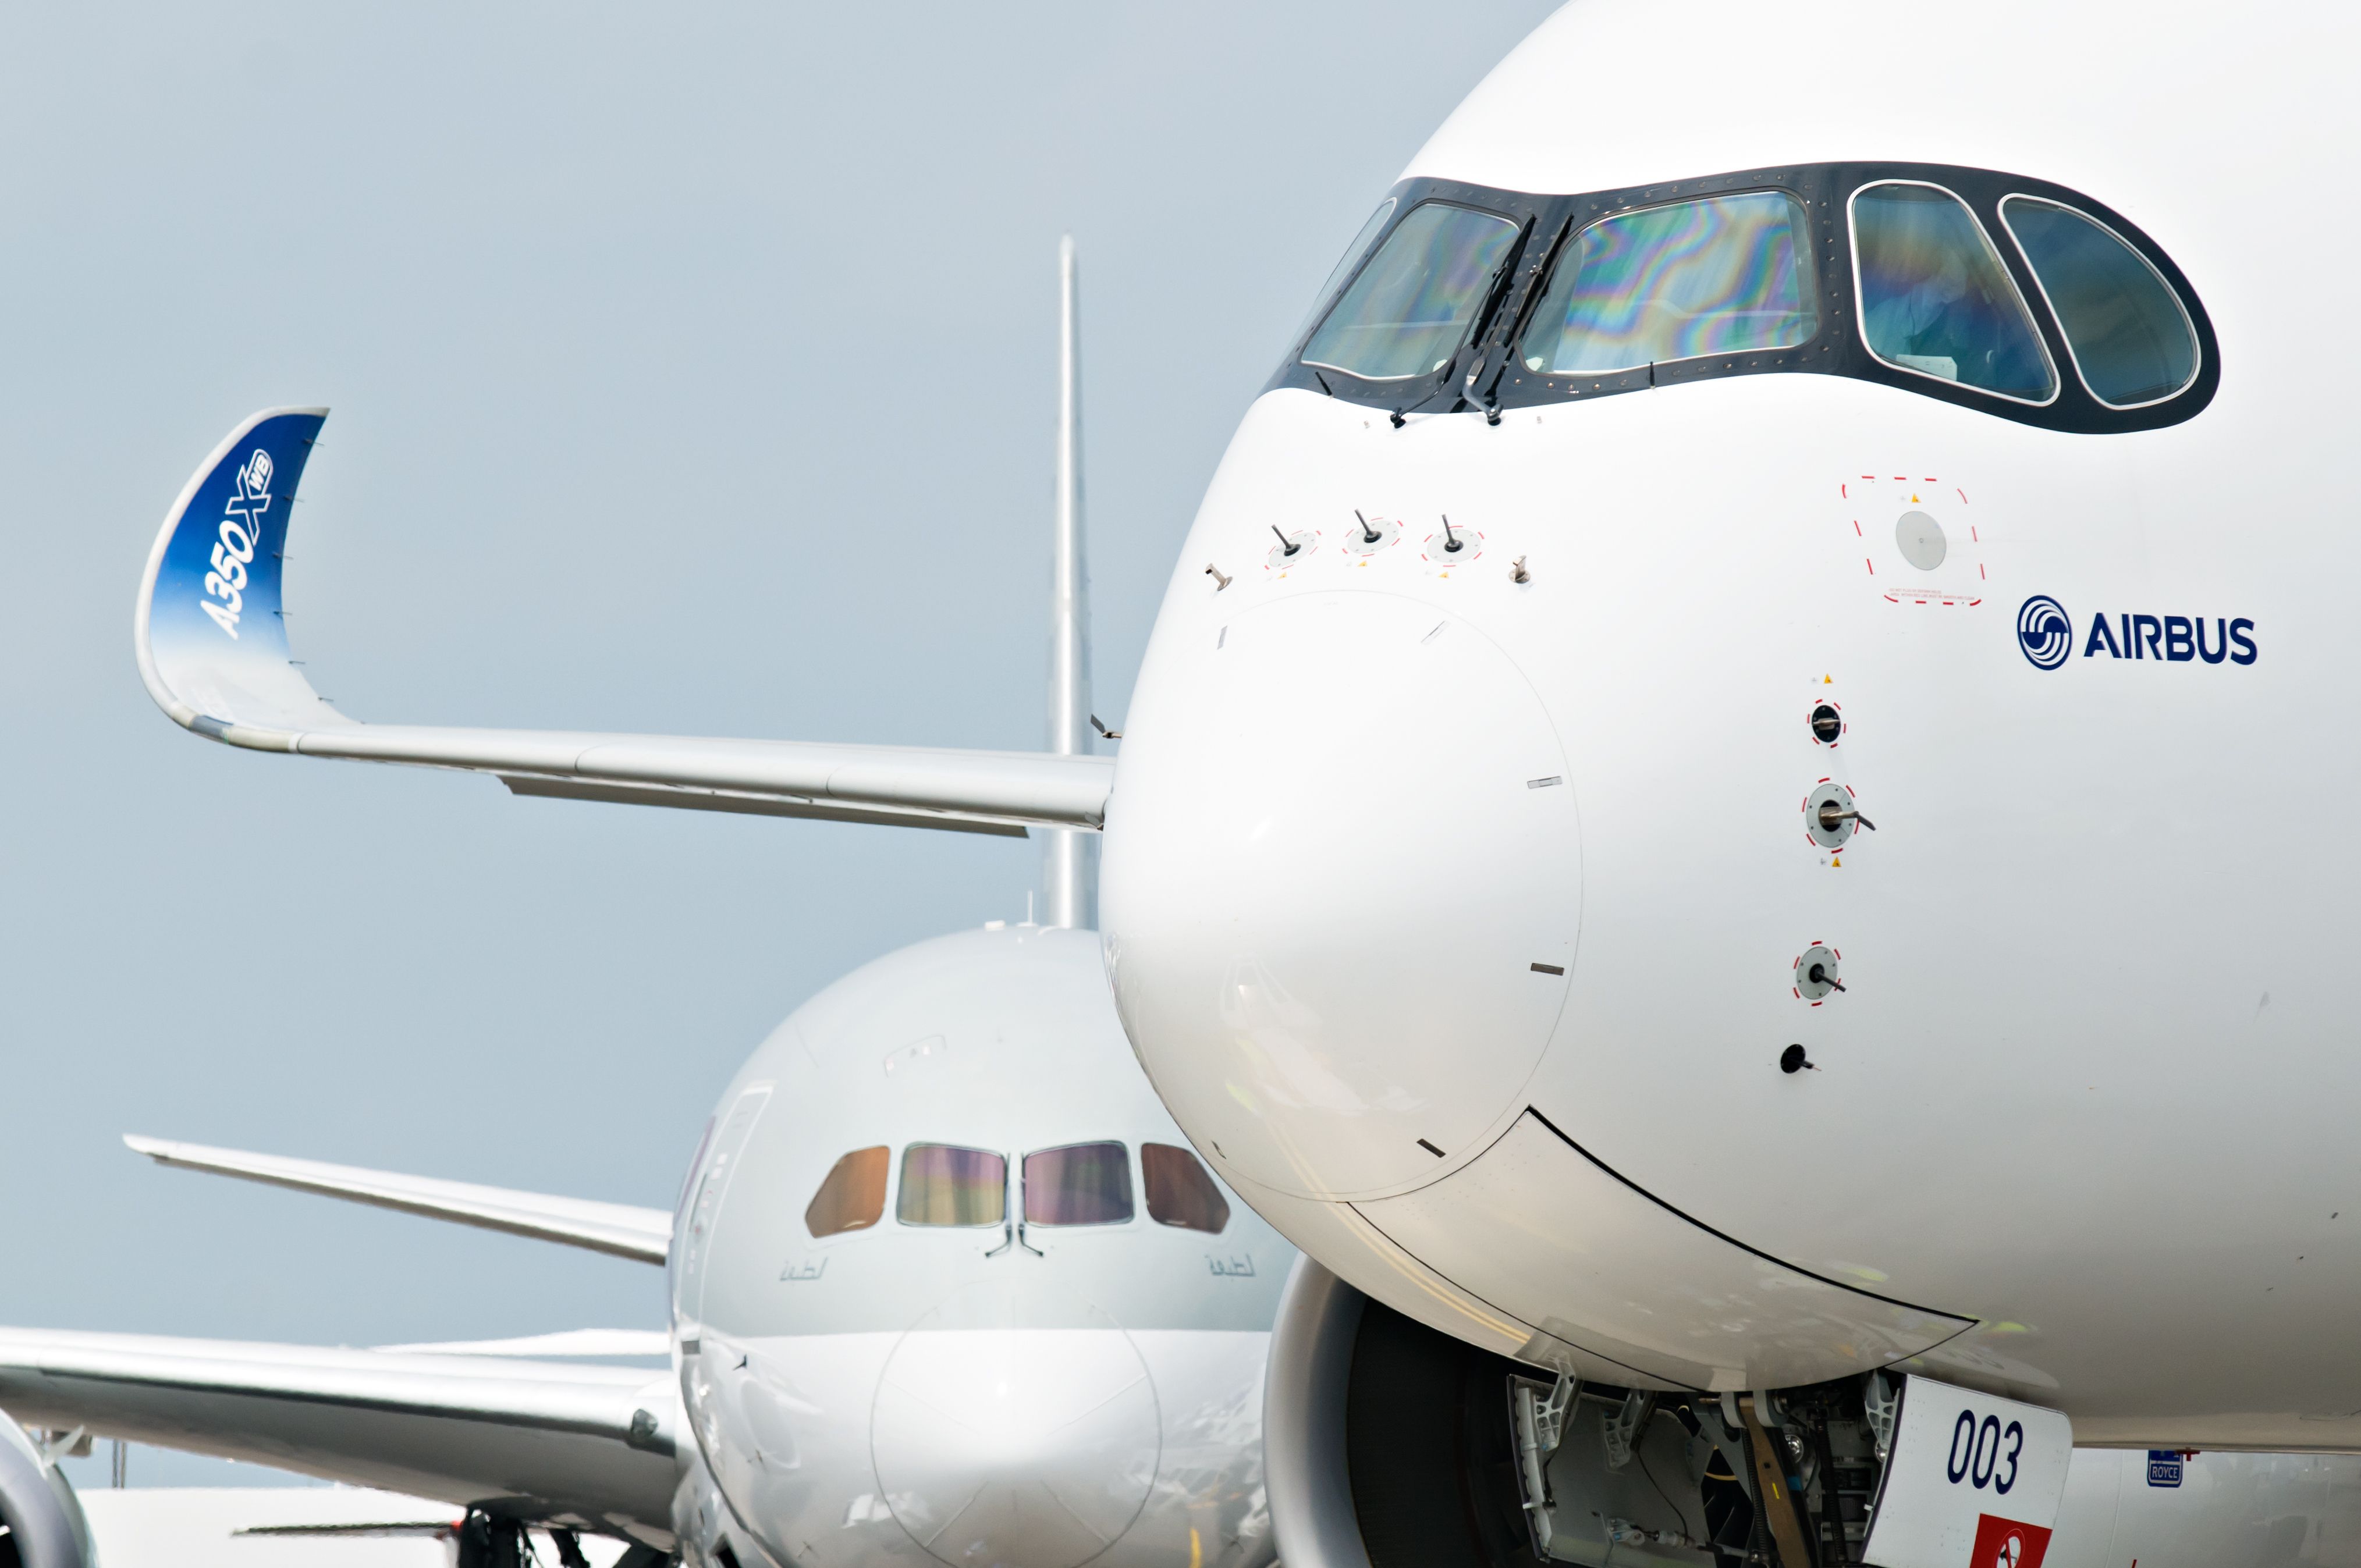 A closeup of an Airbus A350 XWB aircraft with a Boeing 787 Dreamliner in the background.